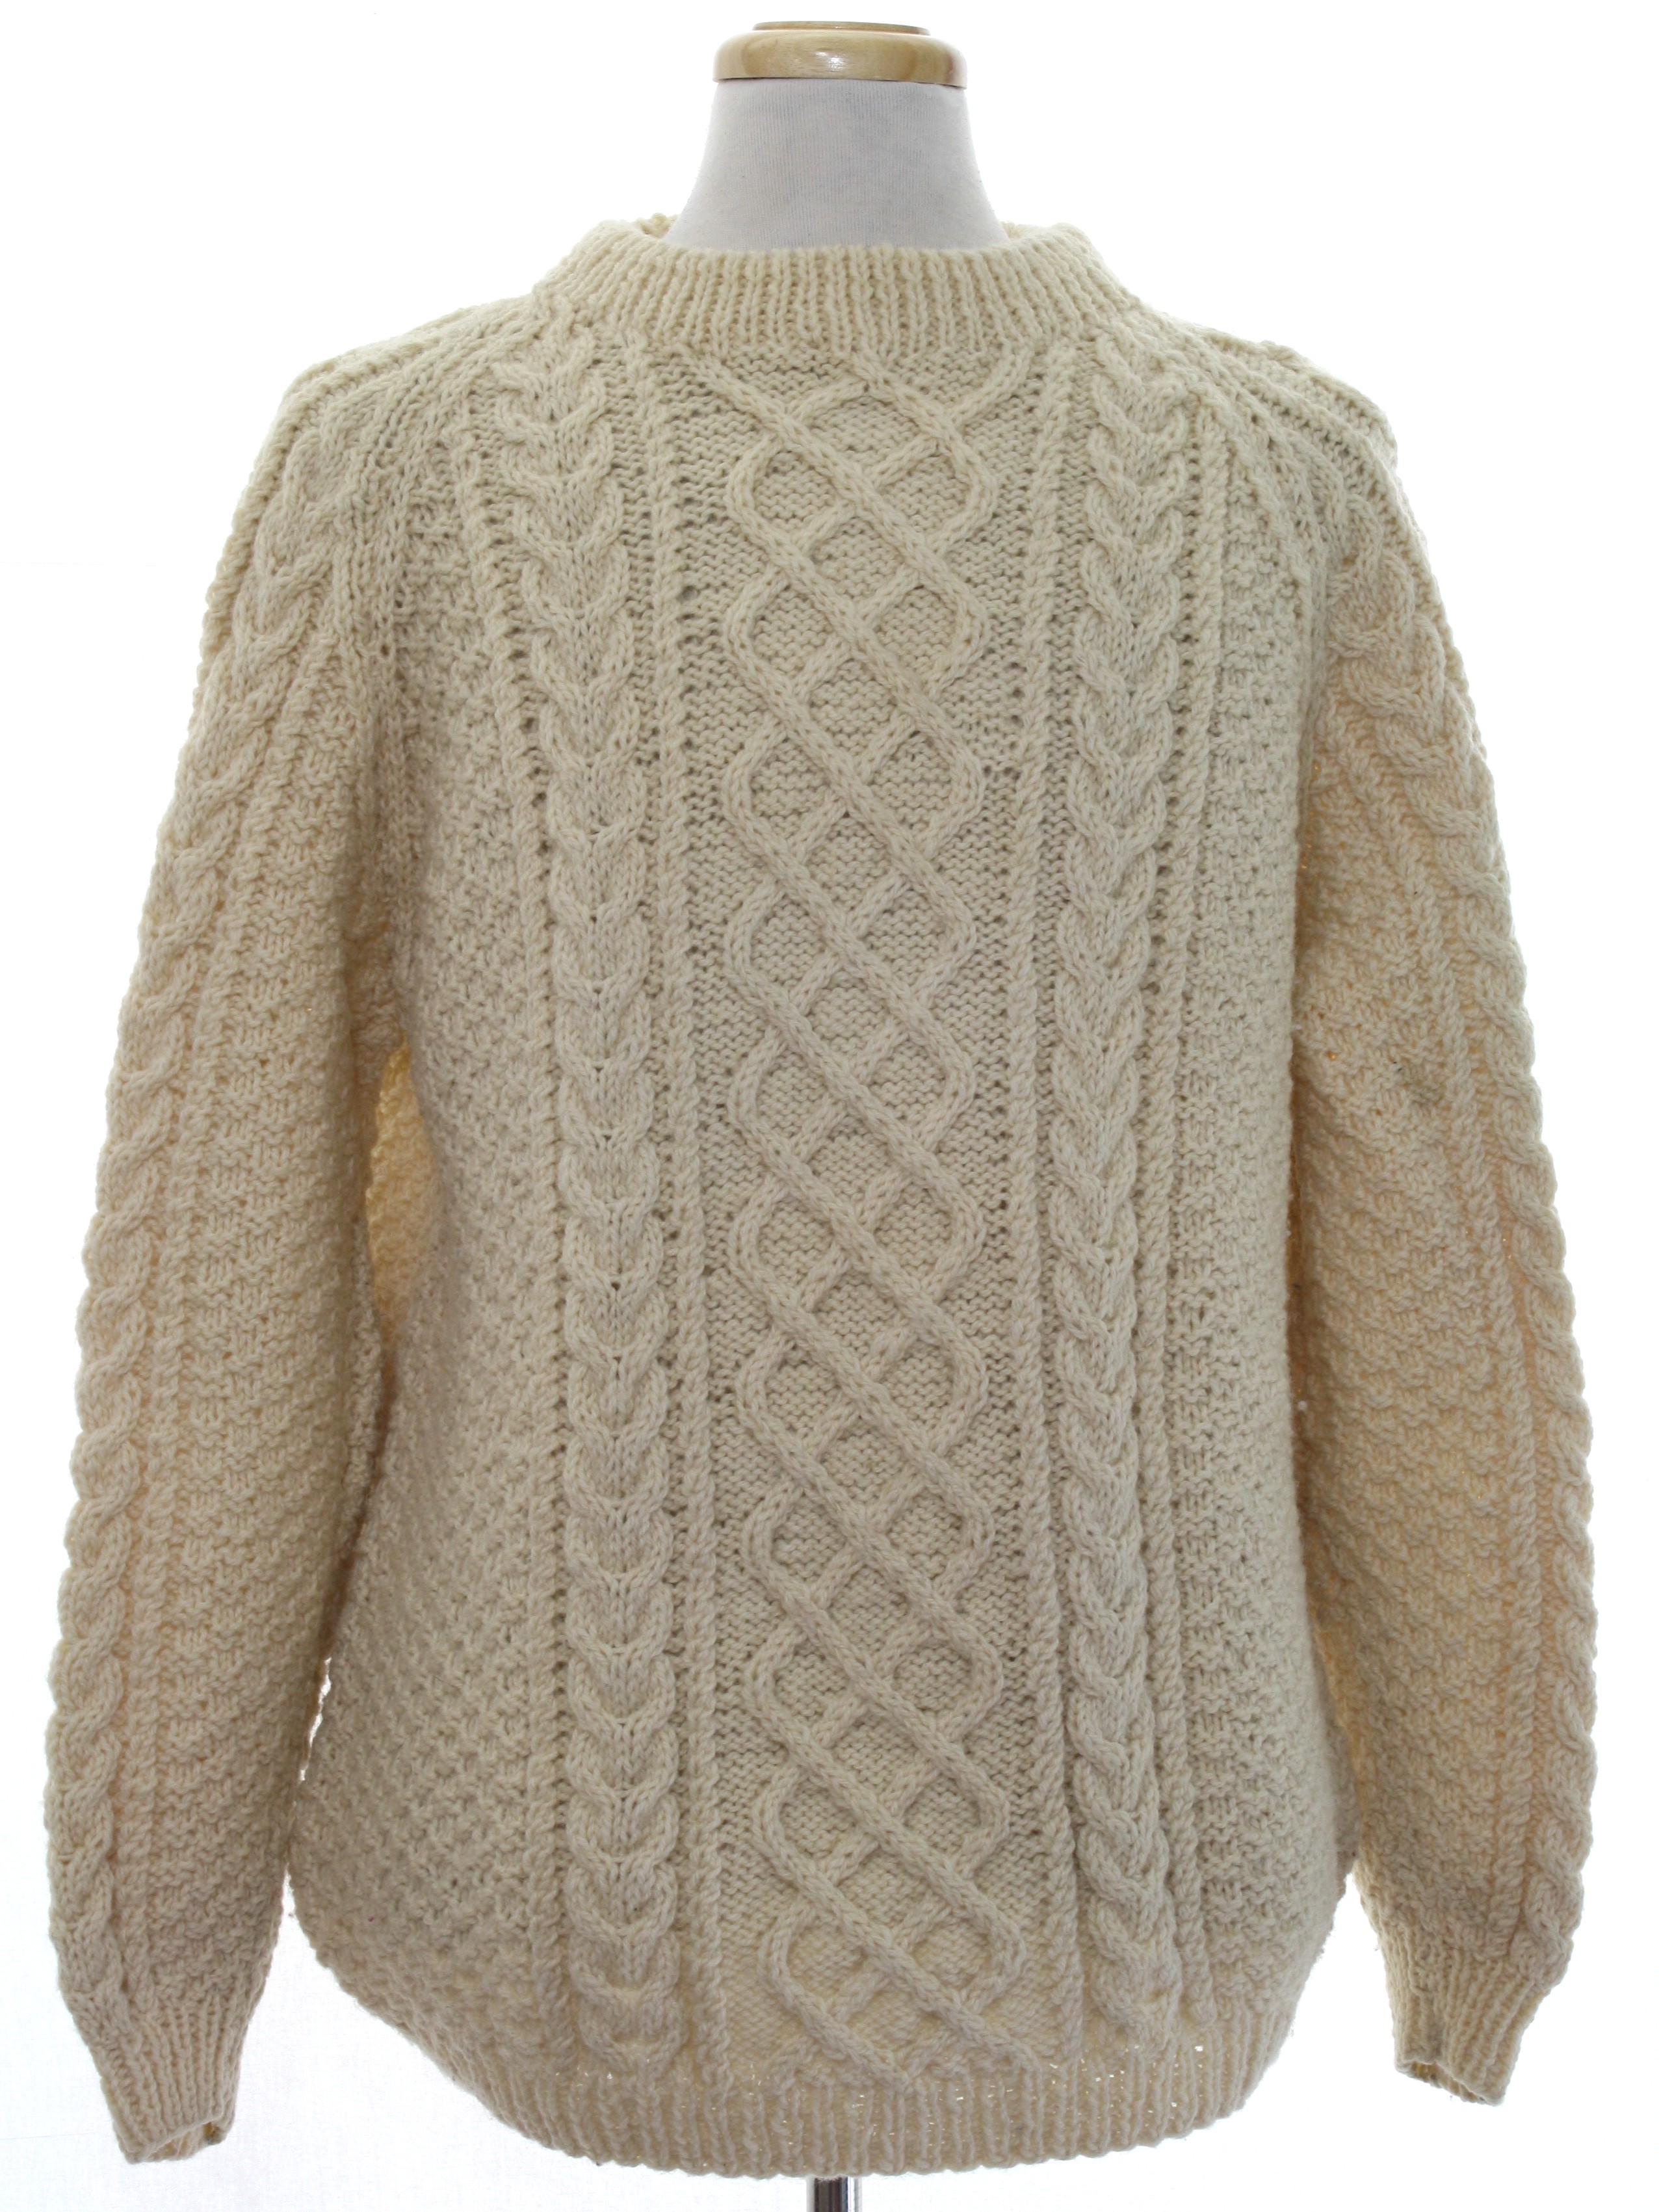 Vintage Hand Knitted 70's Sweater: 70s -Hand Knitted- Mens natural ...